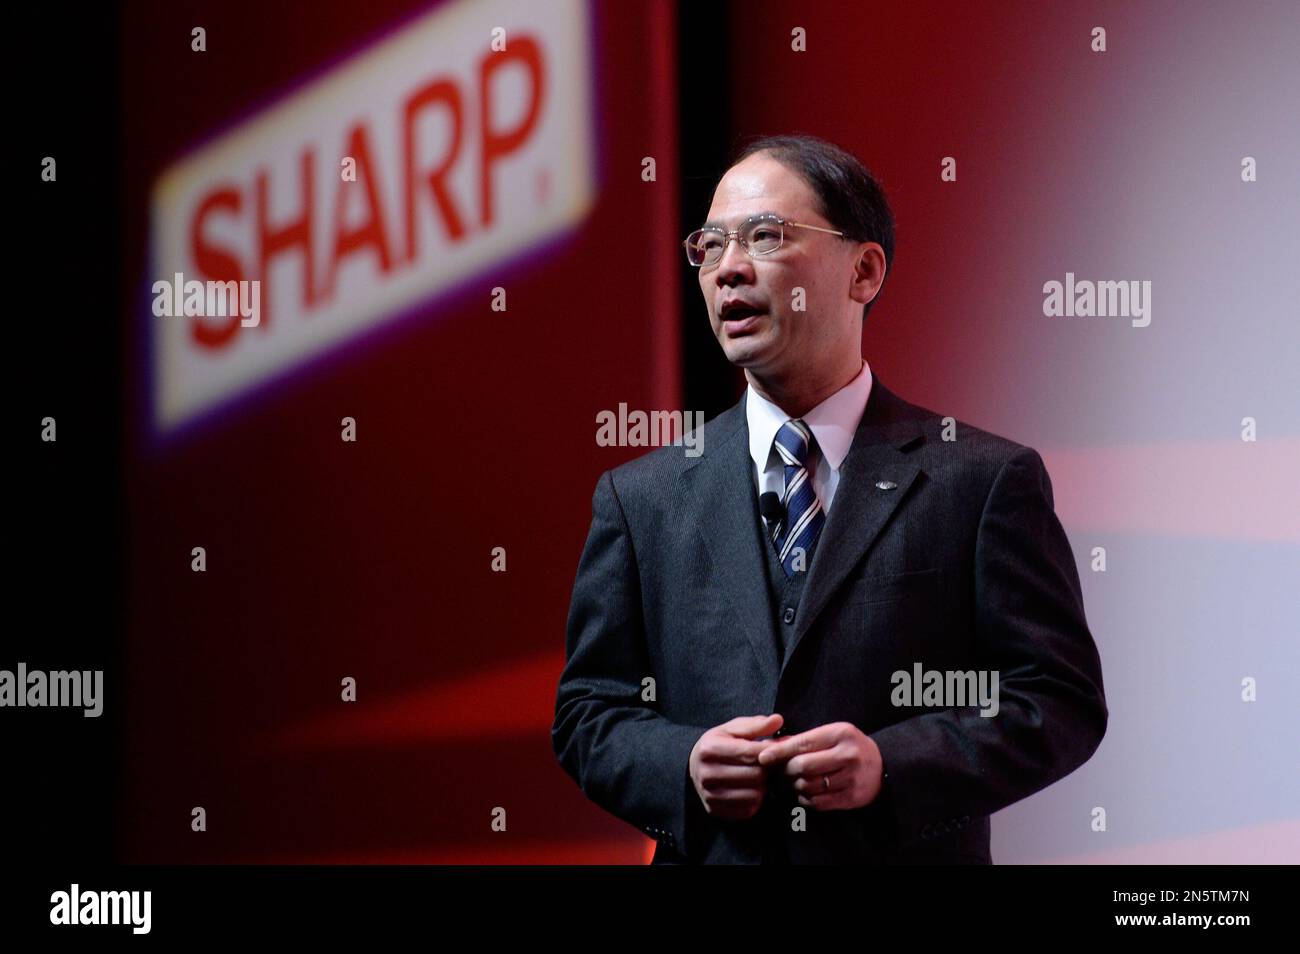 Chairman and CEO of Sharp Electronics Corporation, Toshi Osawa, discusses Sharp's latest innovations at CES on Monday, January 6, 2014 in Las Vegas. (Jeff Bottari/AP Images for Sharp Electronics Corporation) Stockfoto